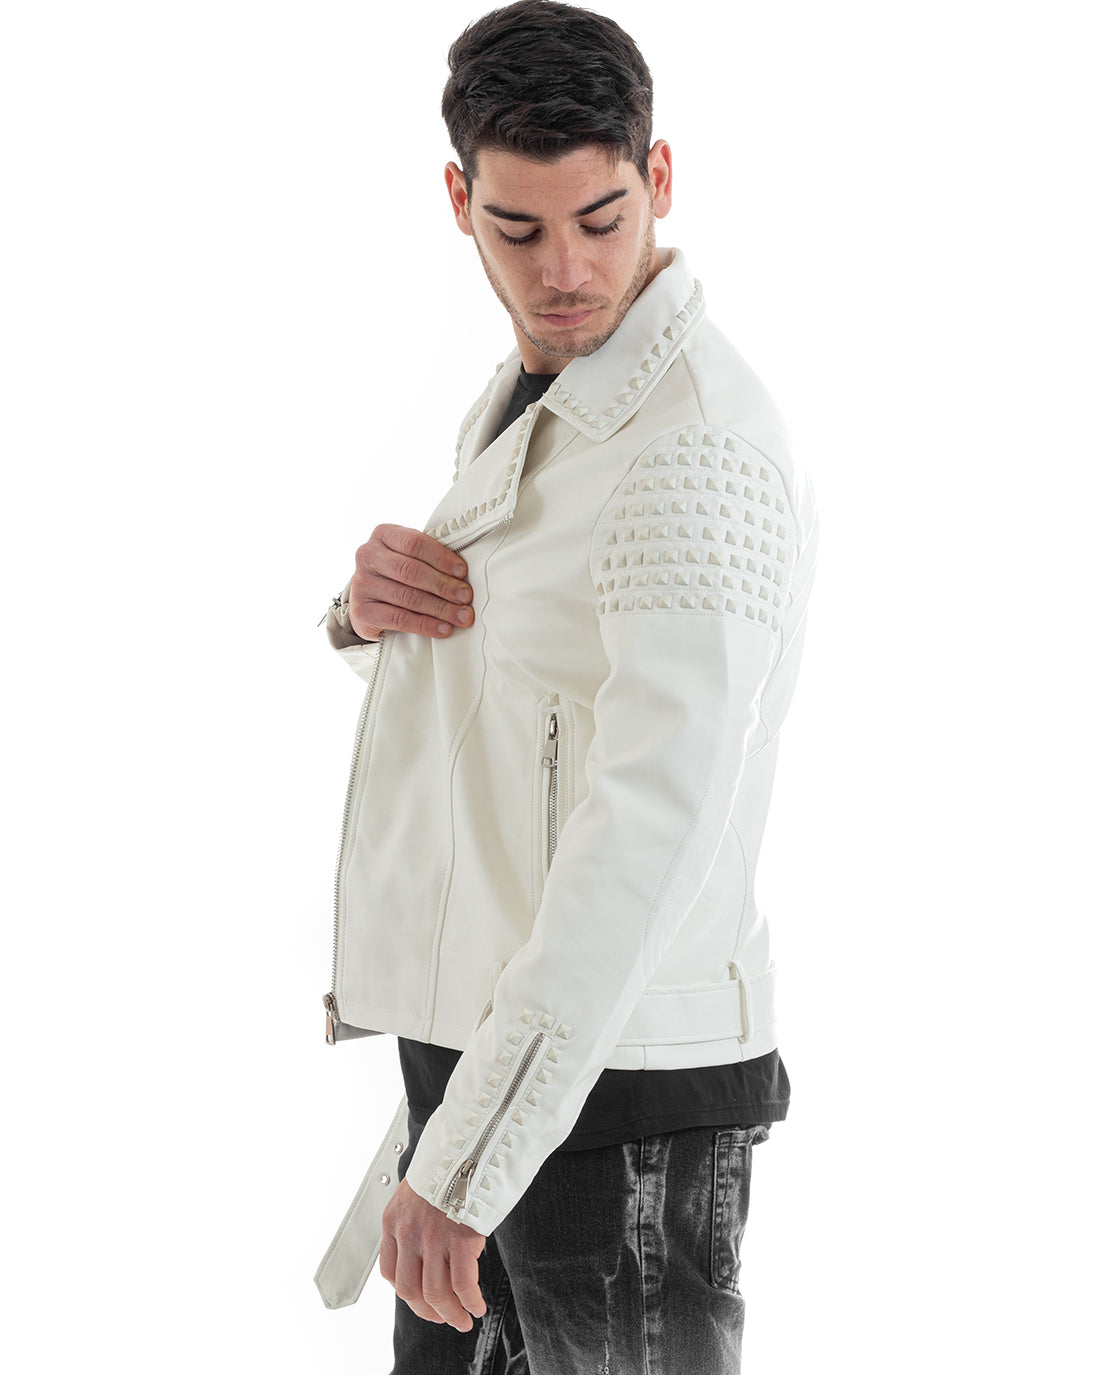 Men's Biker Jacket Studded Collar Solid Color White GIOSAL-G3025A